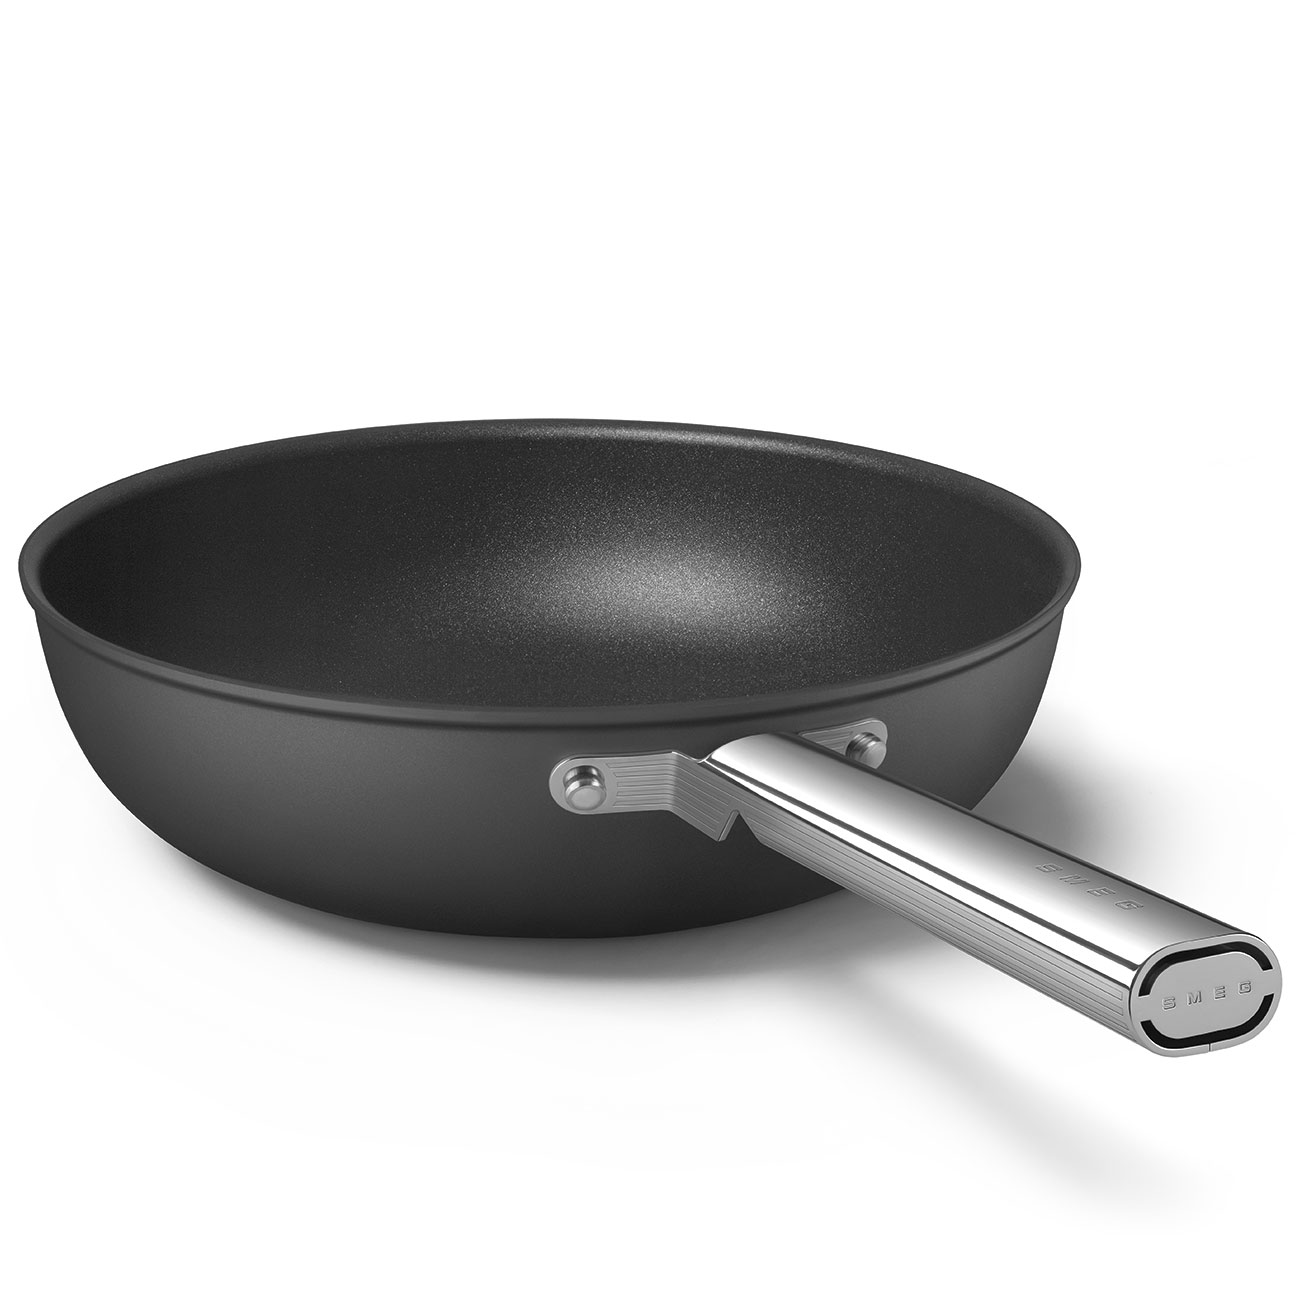 Smeg Black Non-stick Wok with Stainless Steel Handle - CKFW3001BLM_9